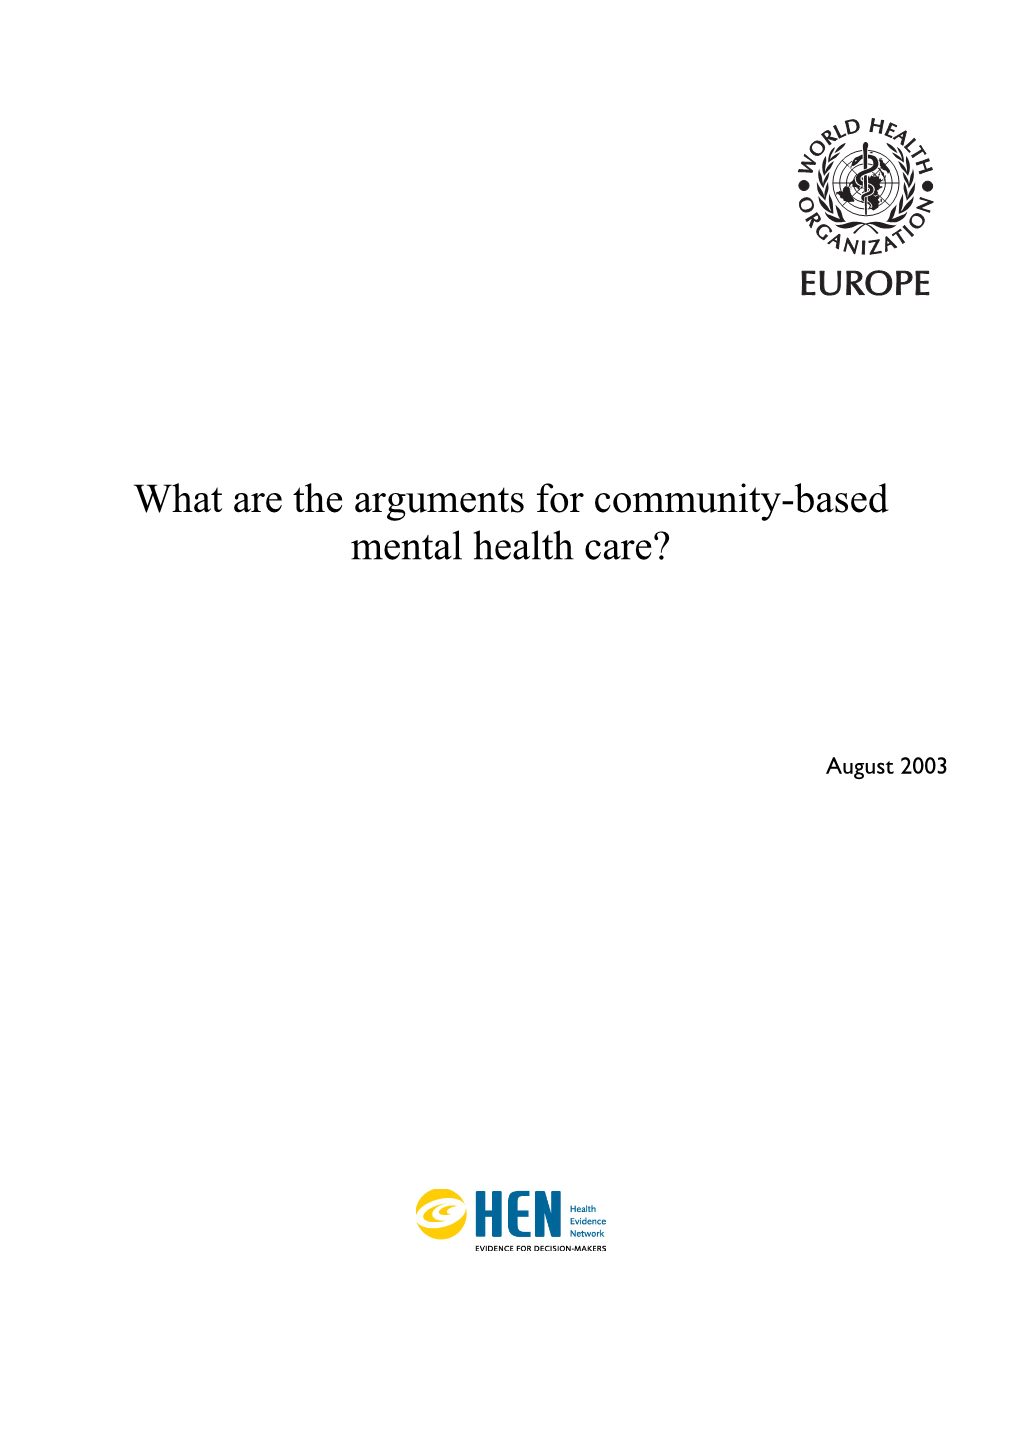 What Are the Arguments for Community-Based Mental Health Care?